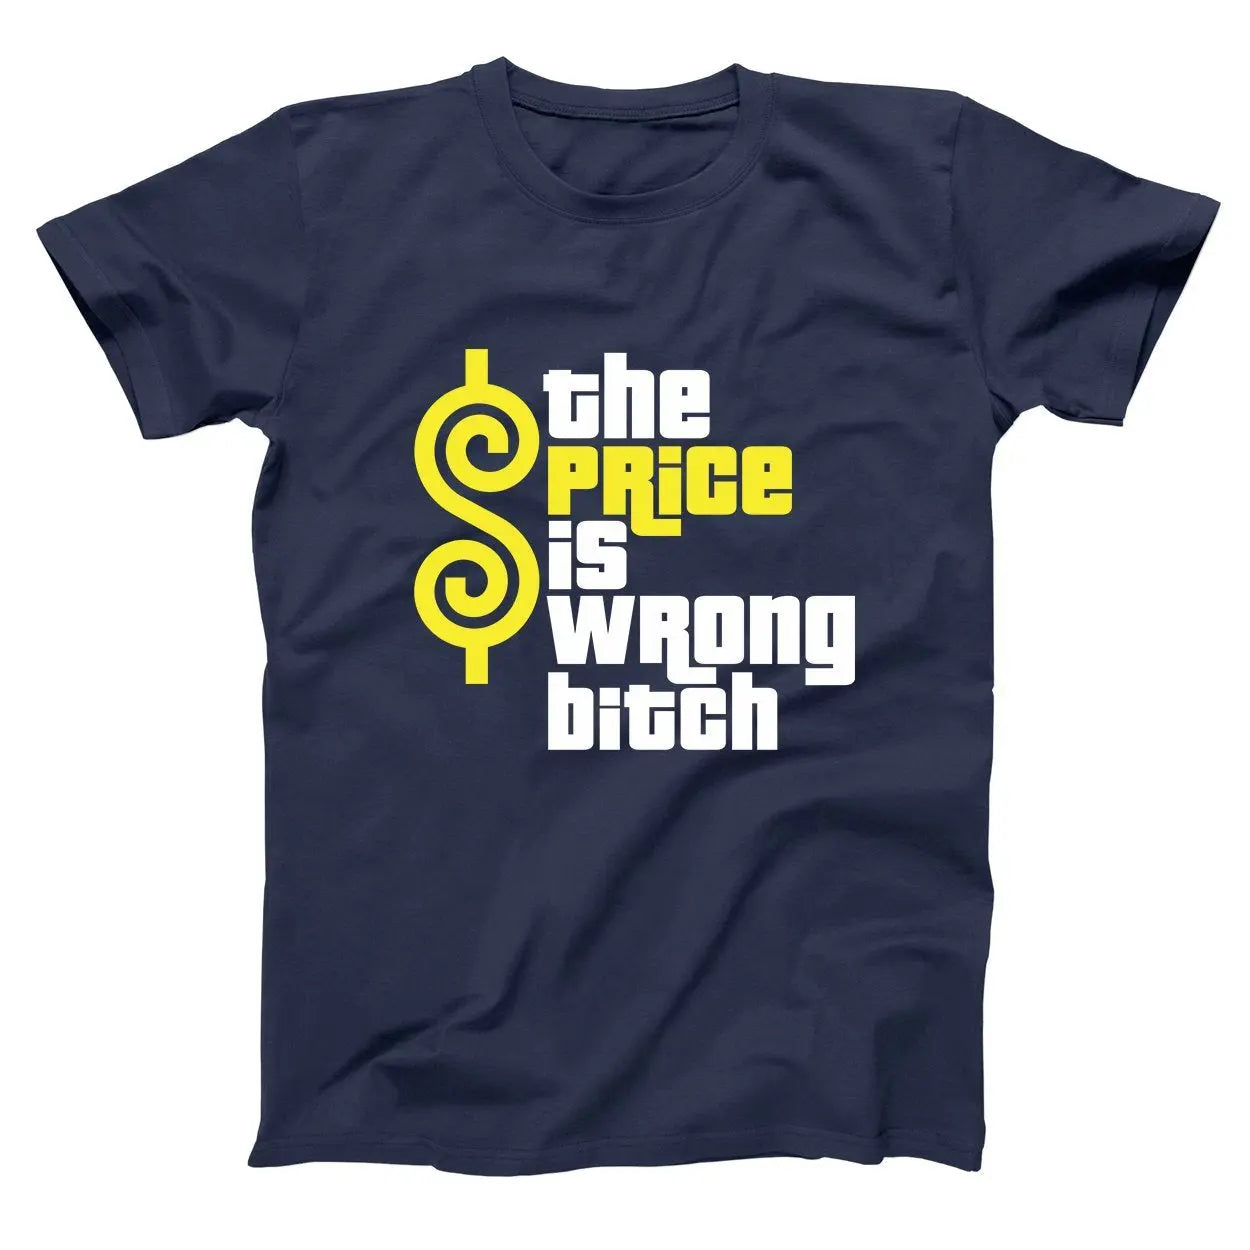 The Price Is Wrong Bitch Tshirt - Donkey Tees